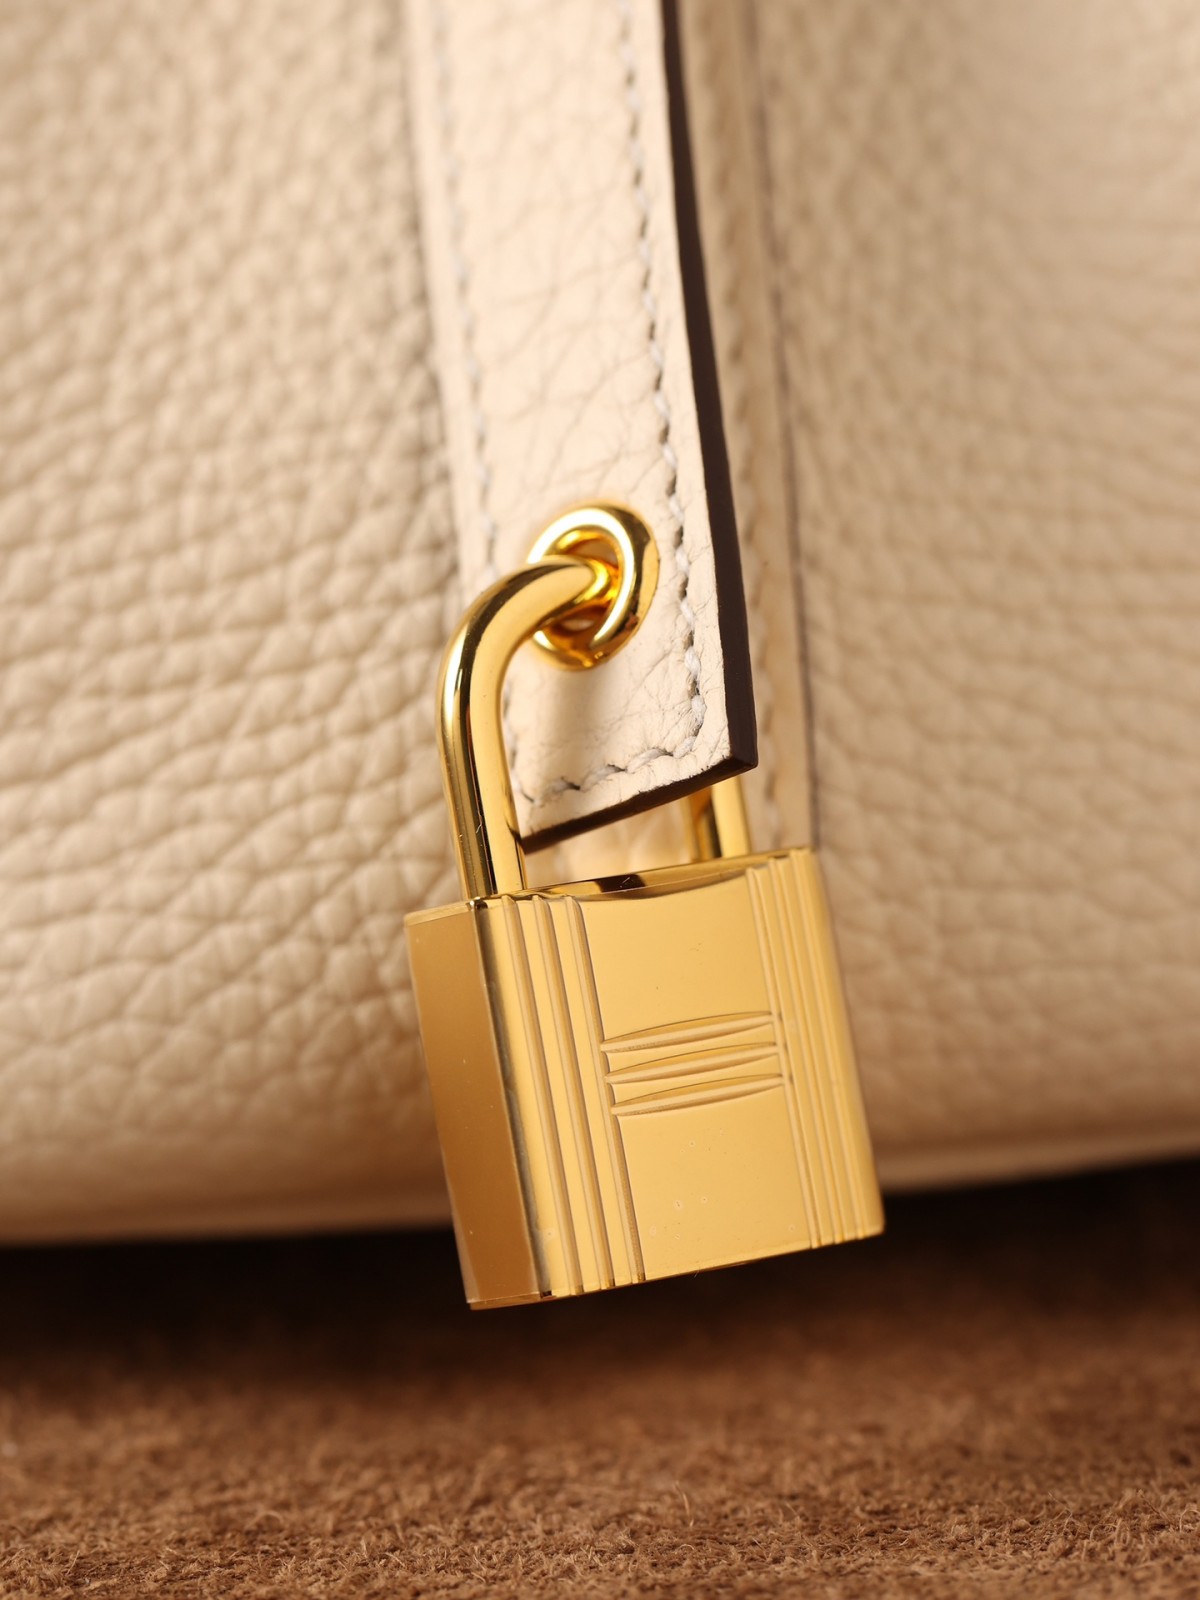 How good quality is a Shebag Hermes Picotin Lock bag（2023 updated）-Best Quality Fake Louis Vuitton Bag Online Store, Replica designer bag ru